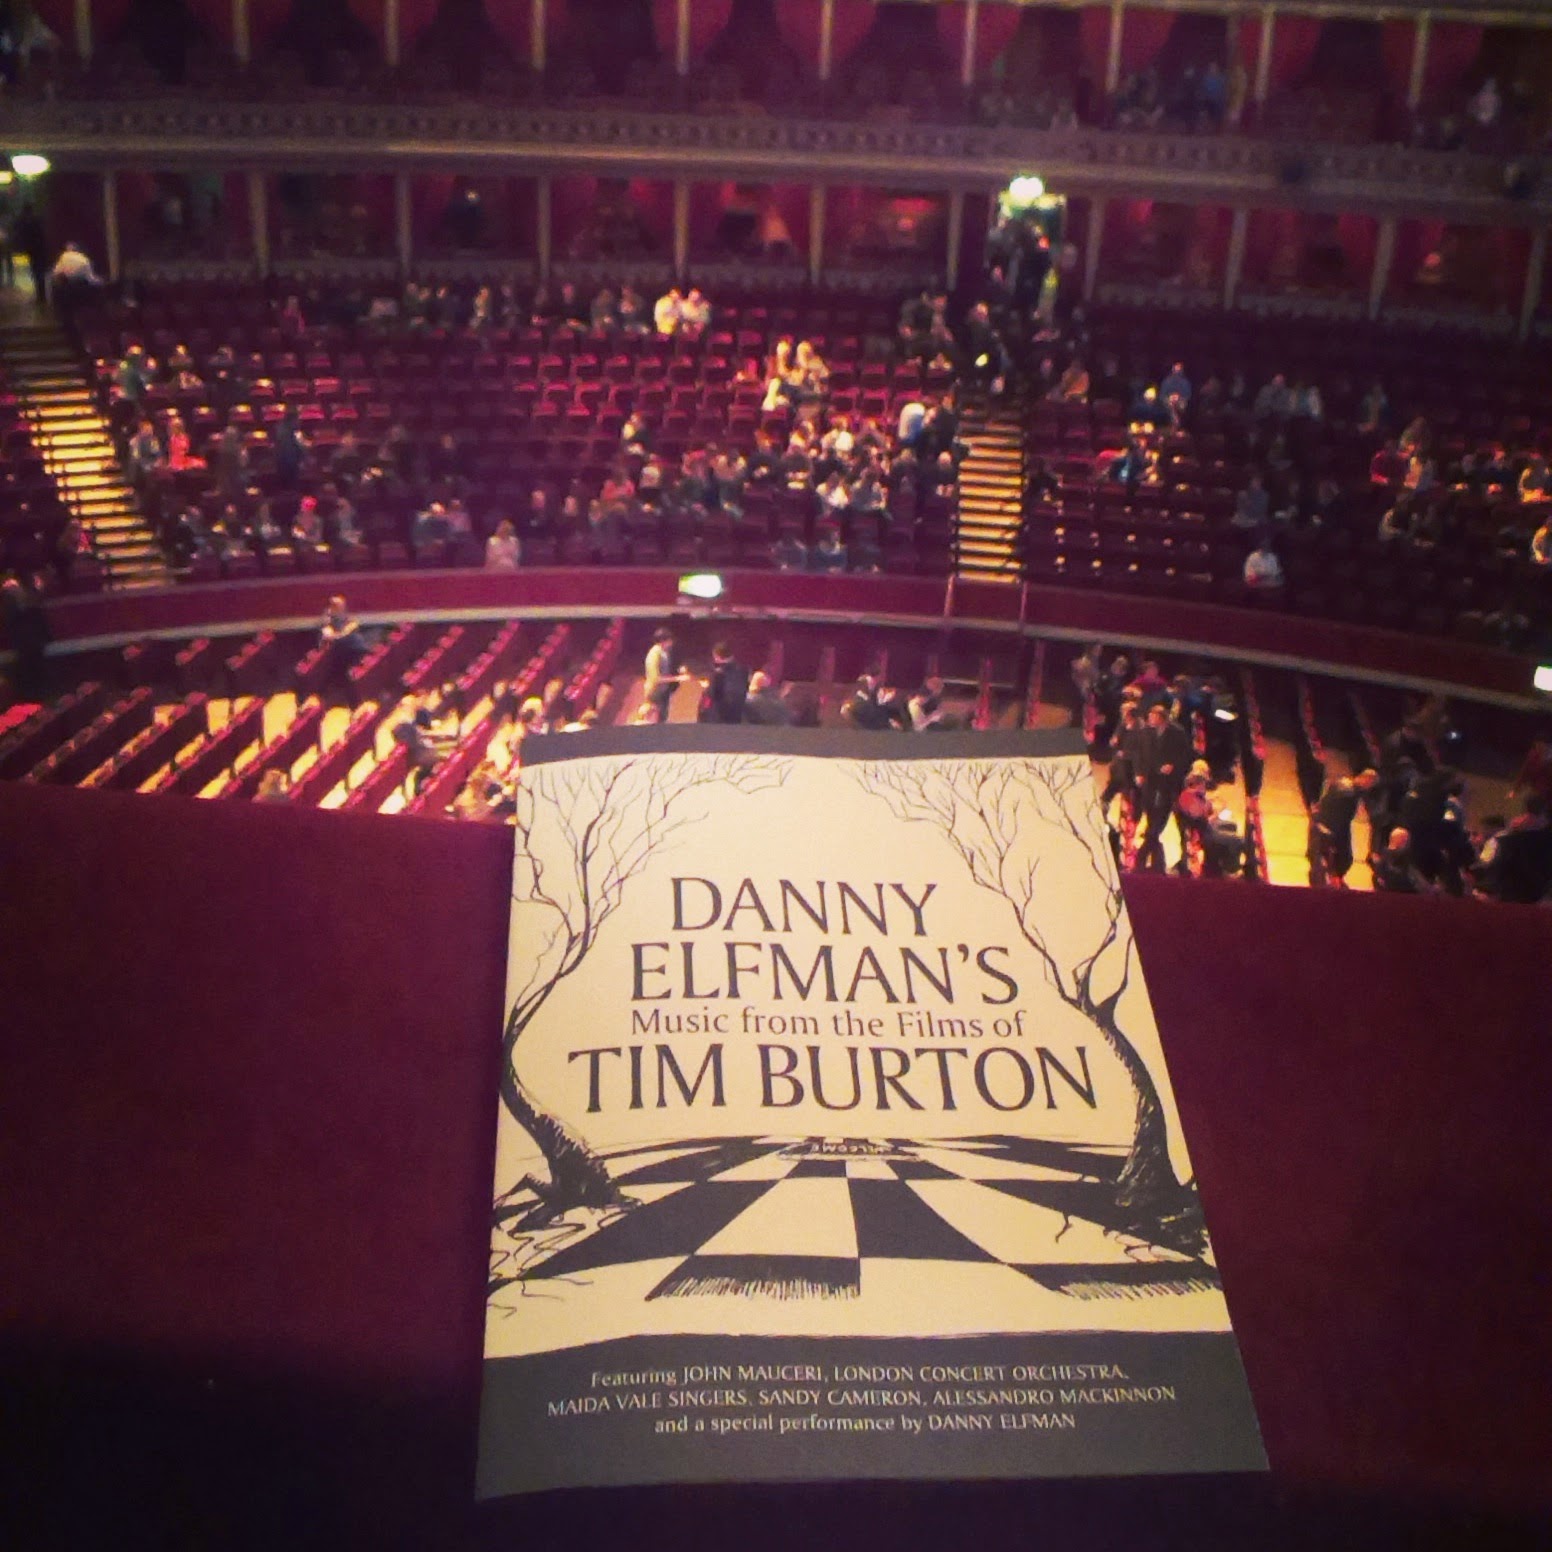 Royal Albert Hall programme and view from box 74